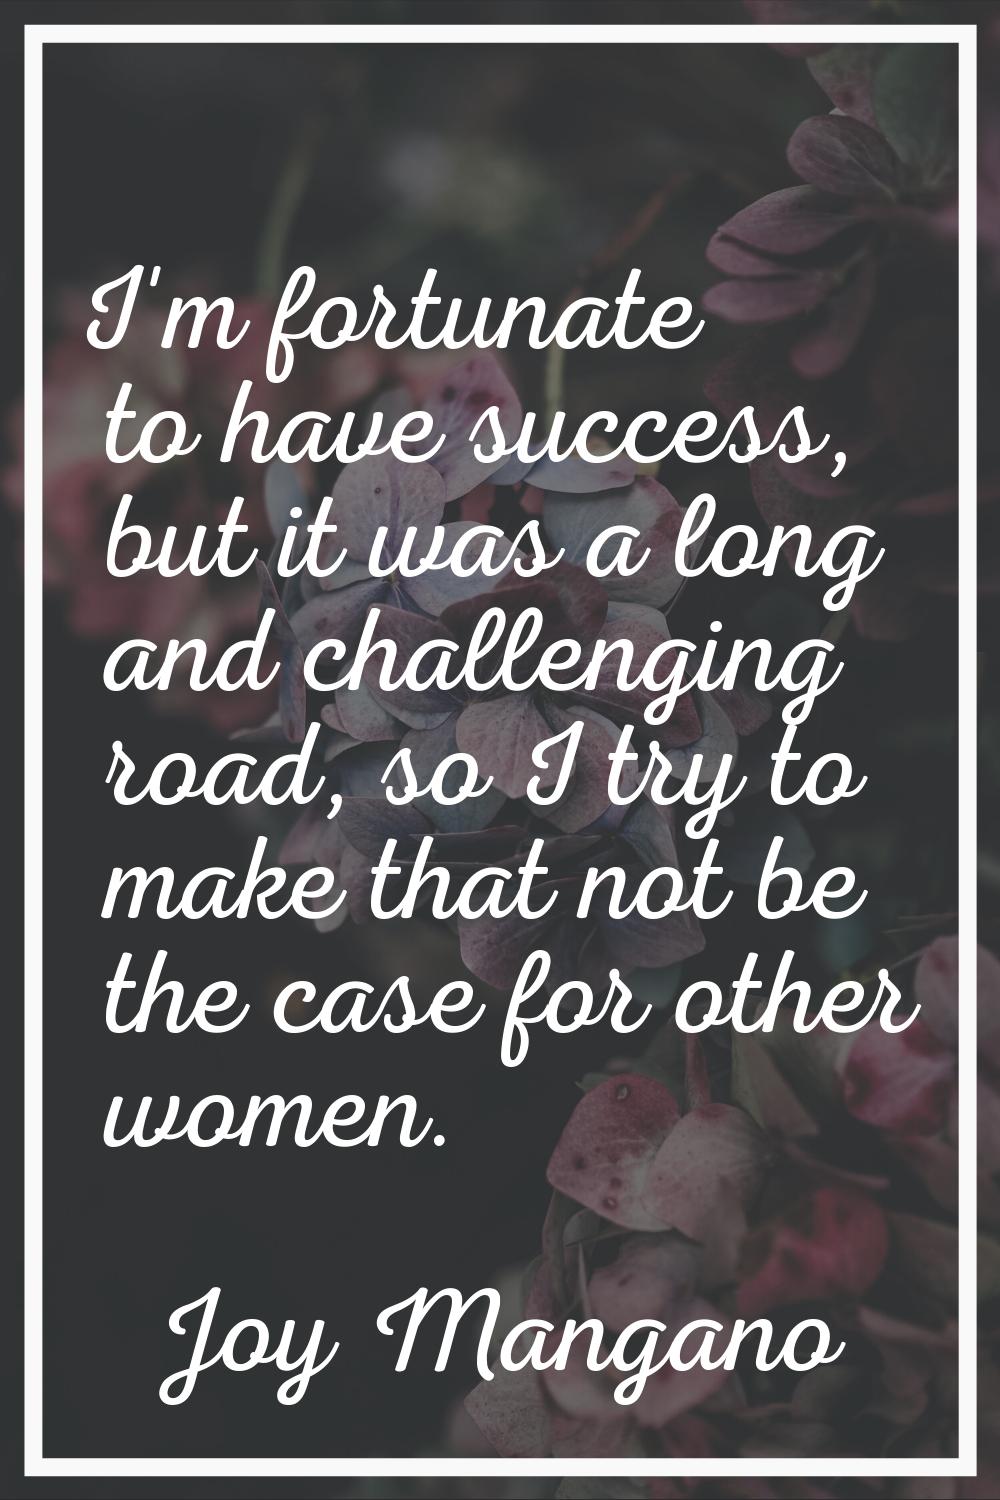 I'm fortunate to have success, but it was a long and challenging road, so I try to make that not be